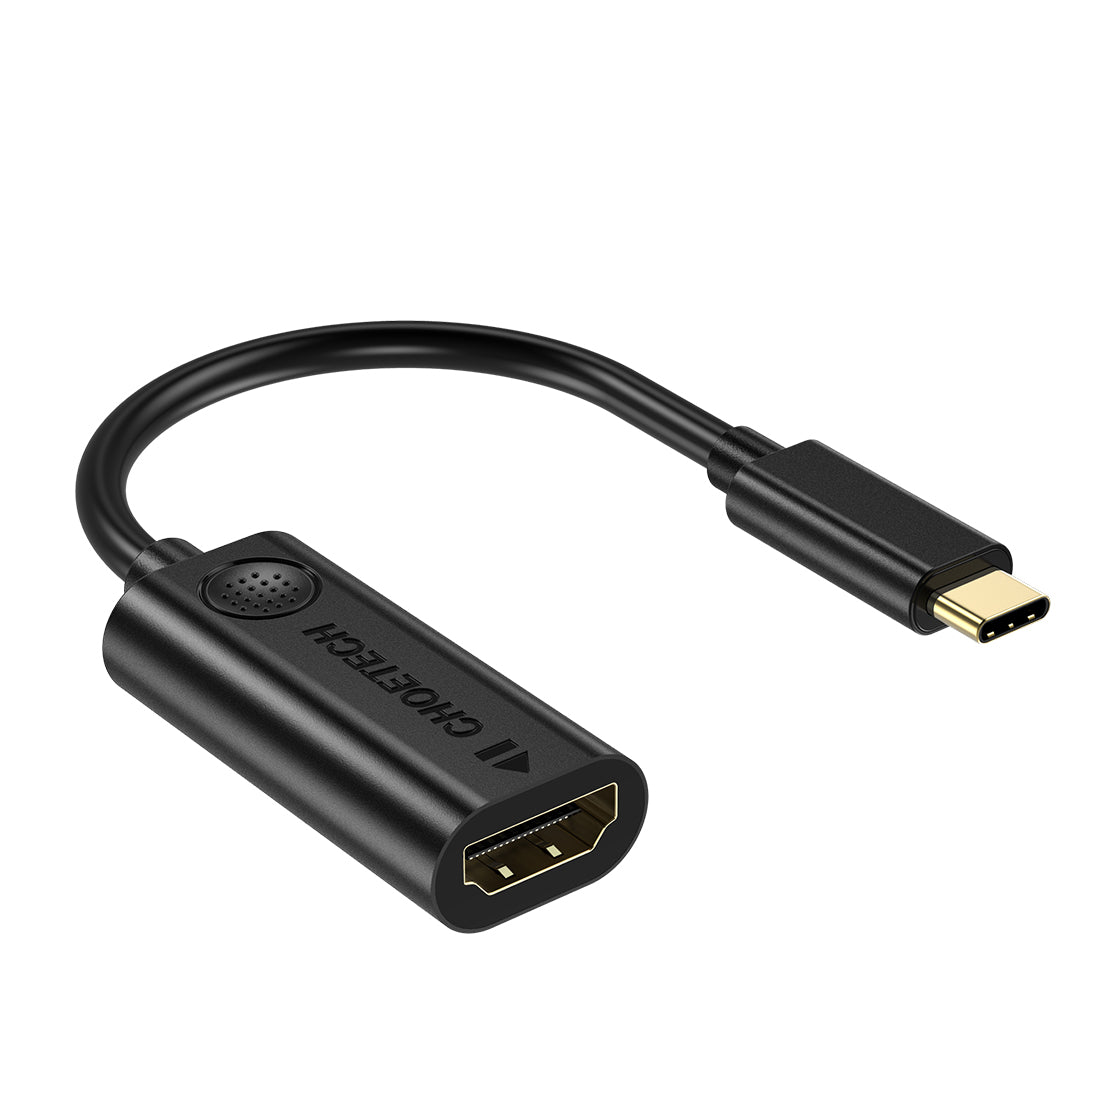 CHOETECH USB 3.1 Type to HDMI Adapter CHOETECH OFFICIAL